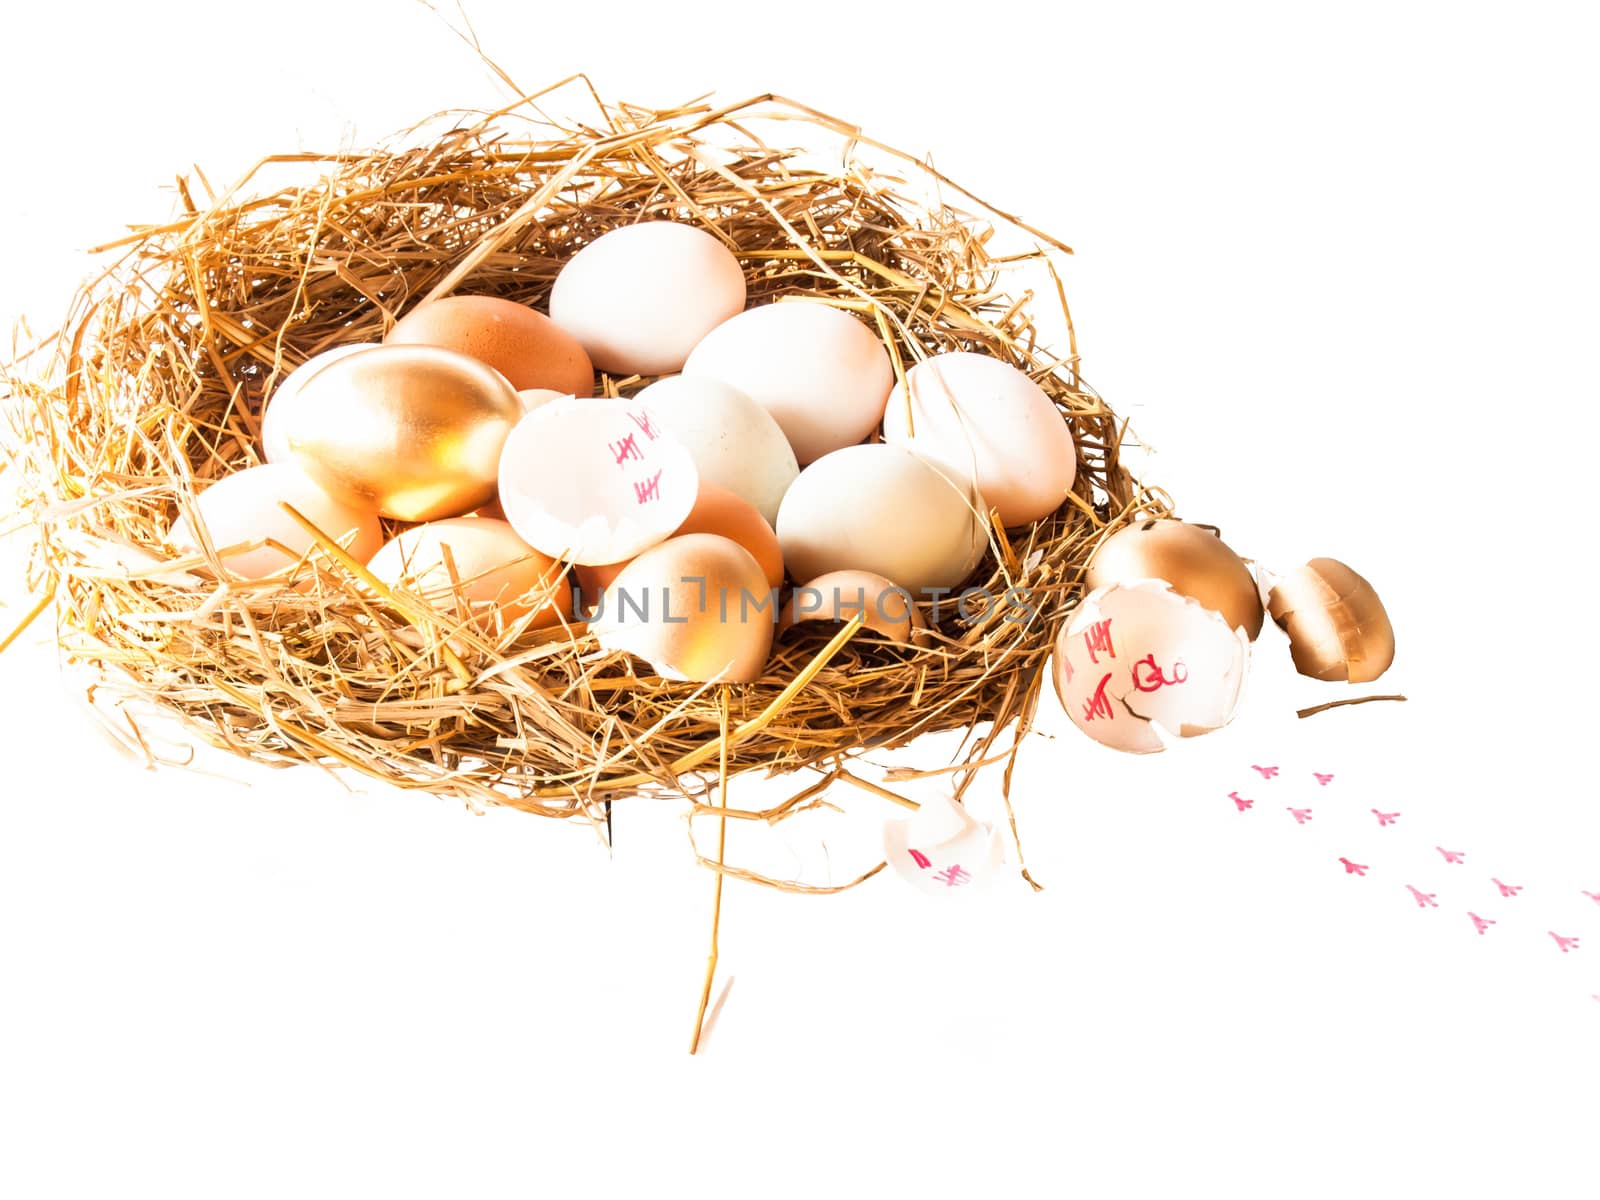 a pile of brown and white and gold eggs in a nest and Broken egg shell isolated on a white background